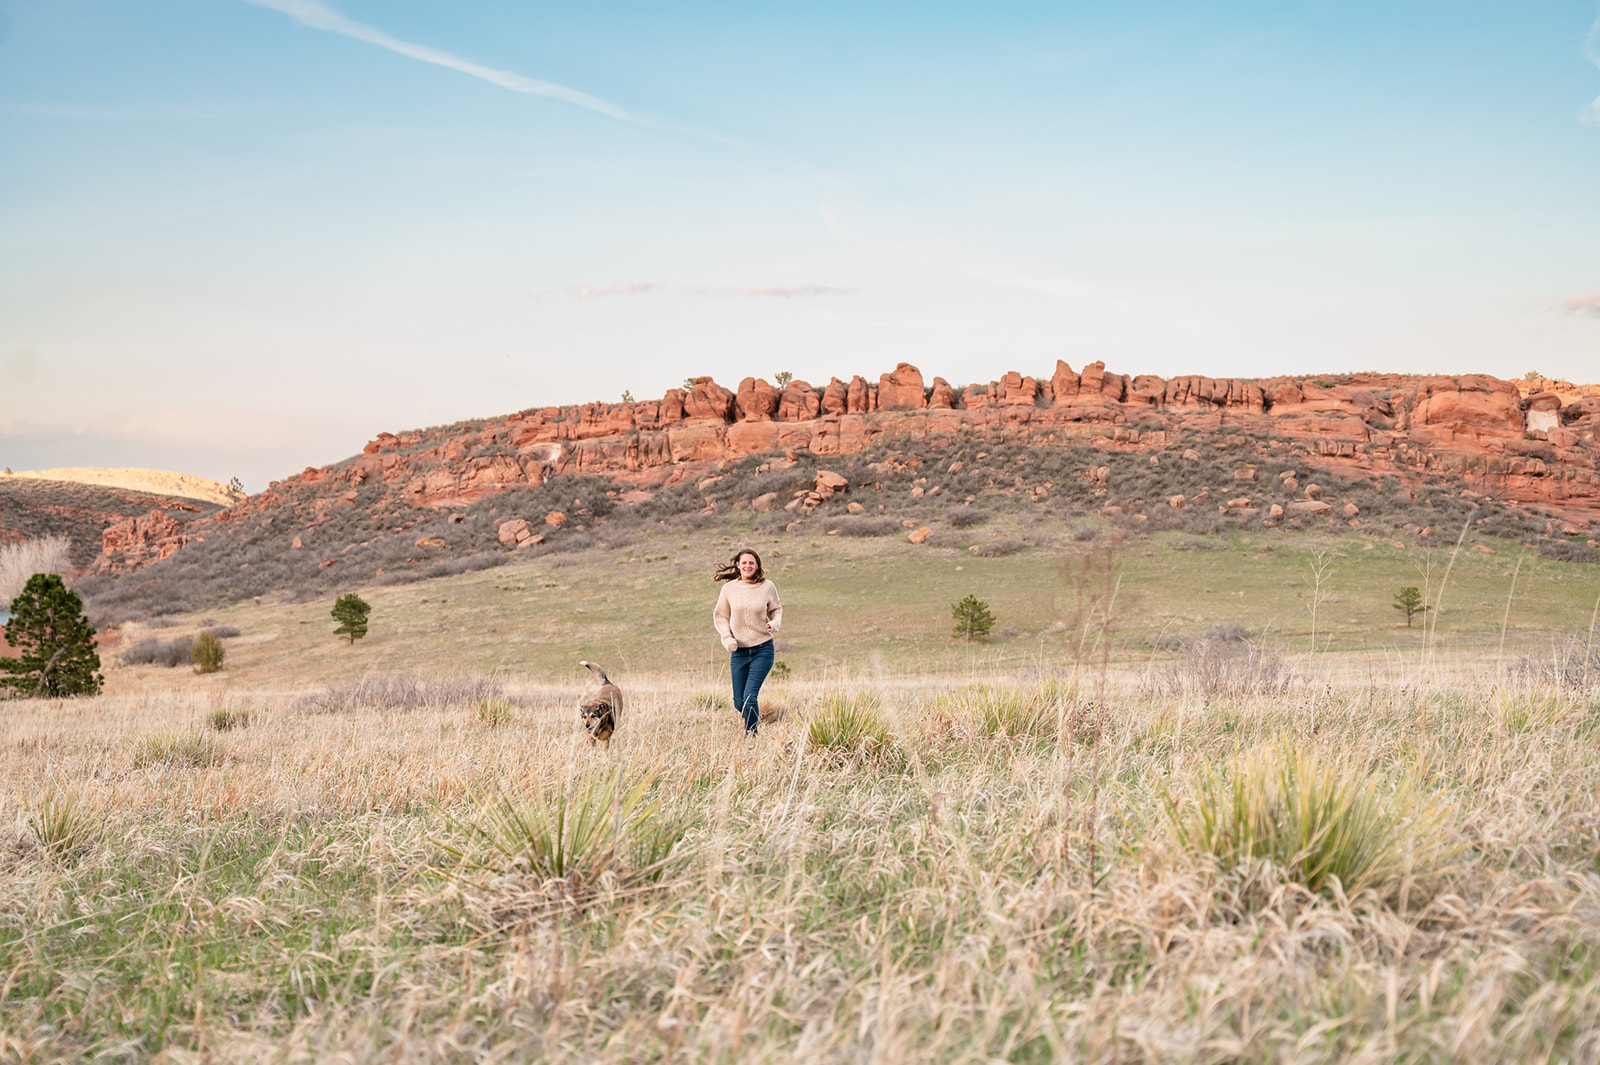 Fort Collins, CO girl hikes with her dog around Lory State Park.